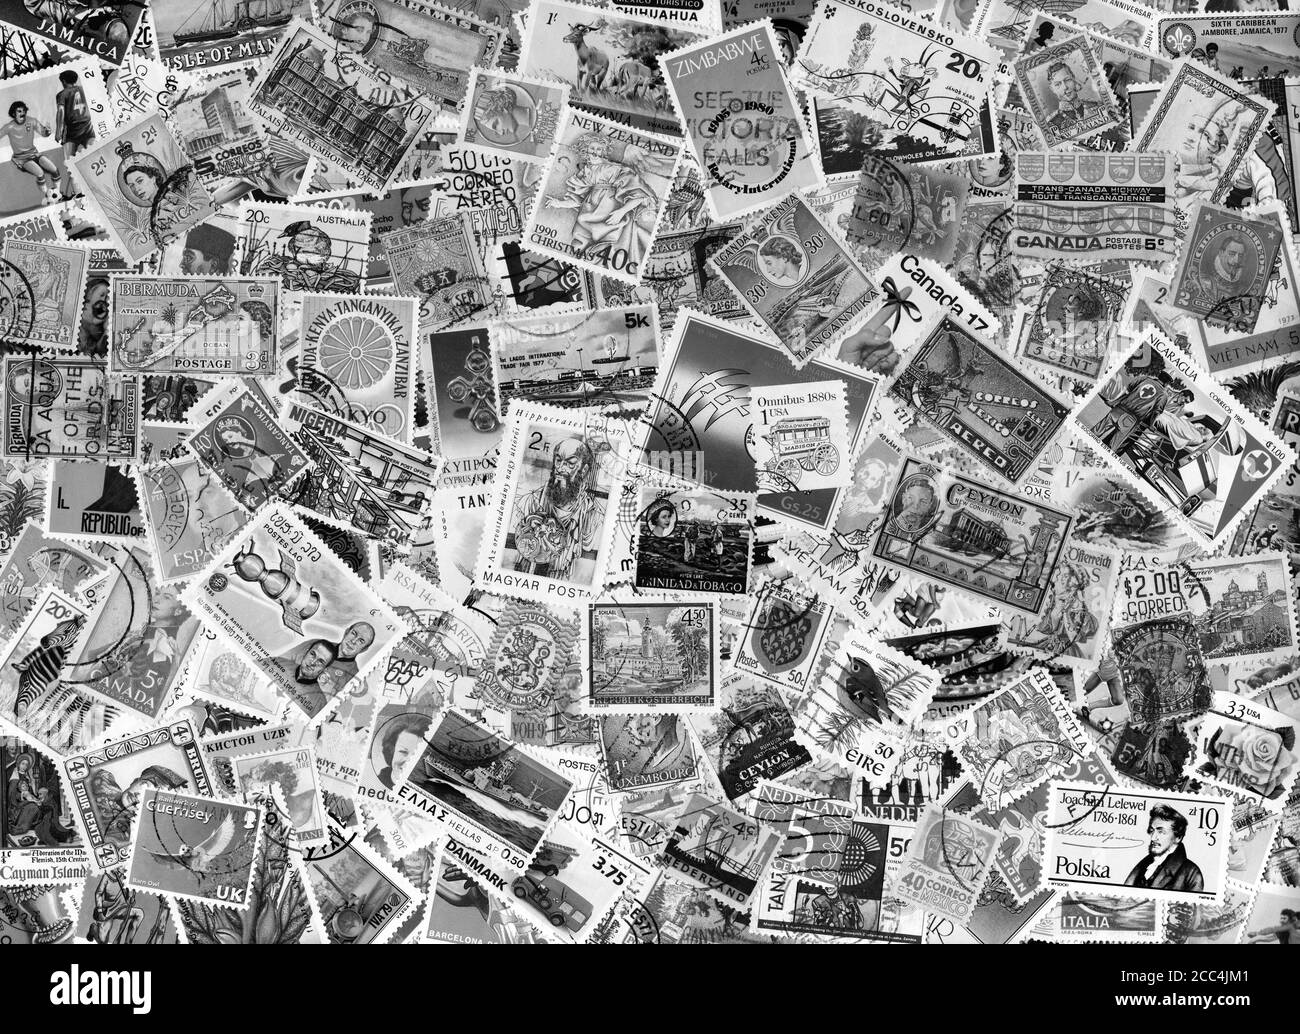 Large world foreign postage stamp collection background black and white monochrome image  stock photo Stock Photo